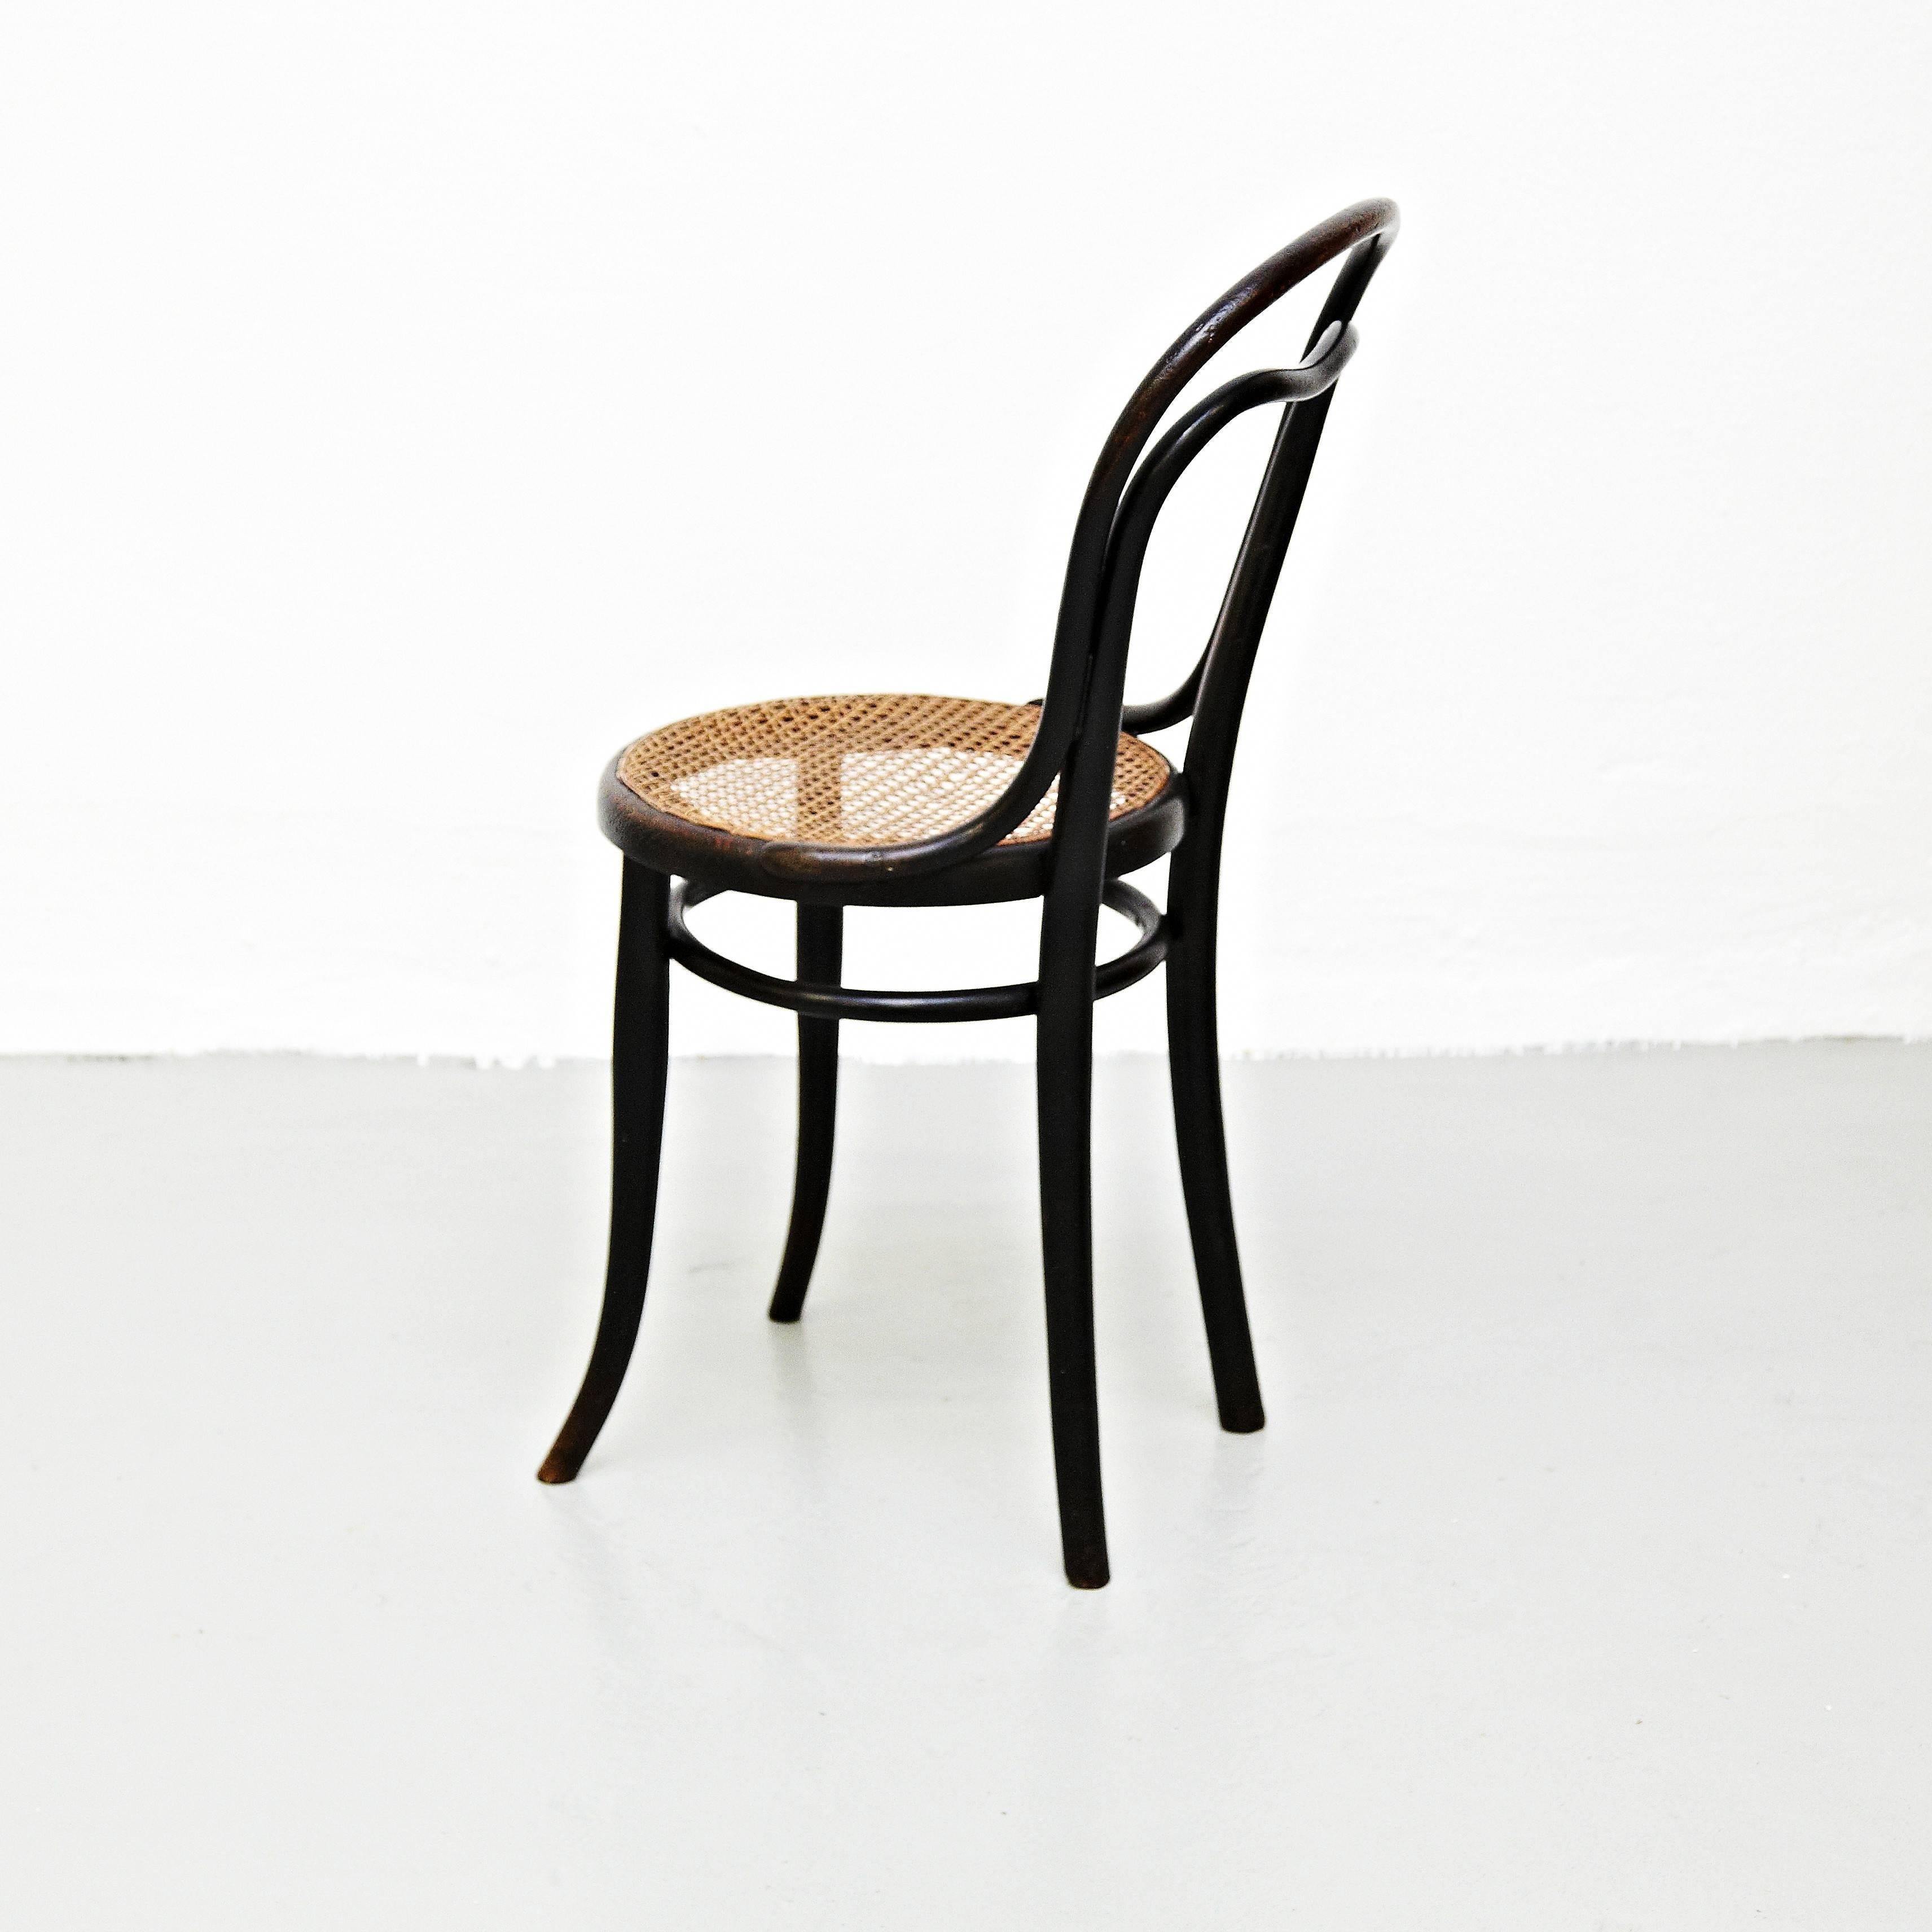 Thonet Chair, manufactured by Thonet around 1920.

It preserves the original label to the underside.

In good original condition, with minor wear consistent with age and use, preserving a beautiful patina.

Thonet was the son of master tanner